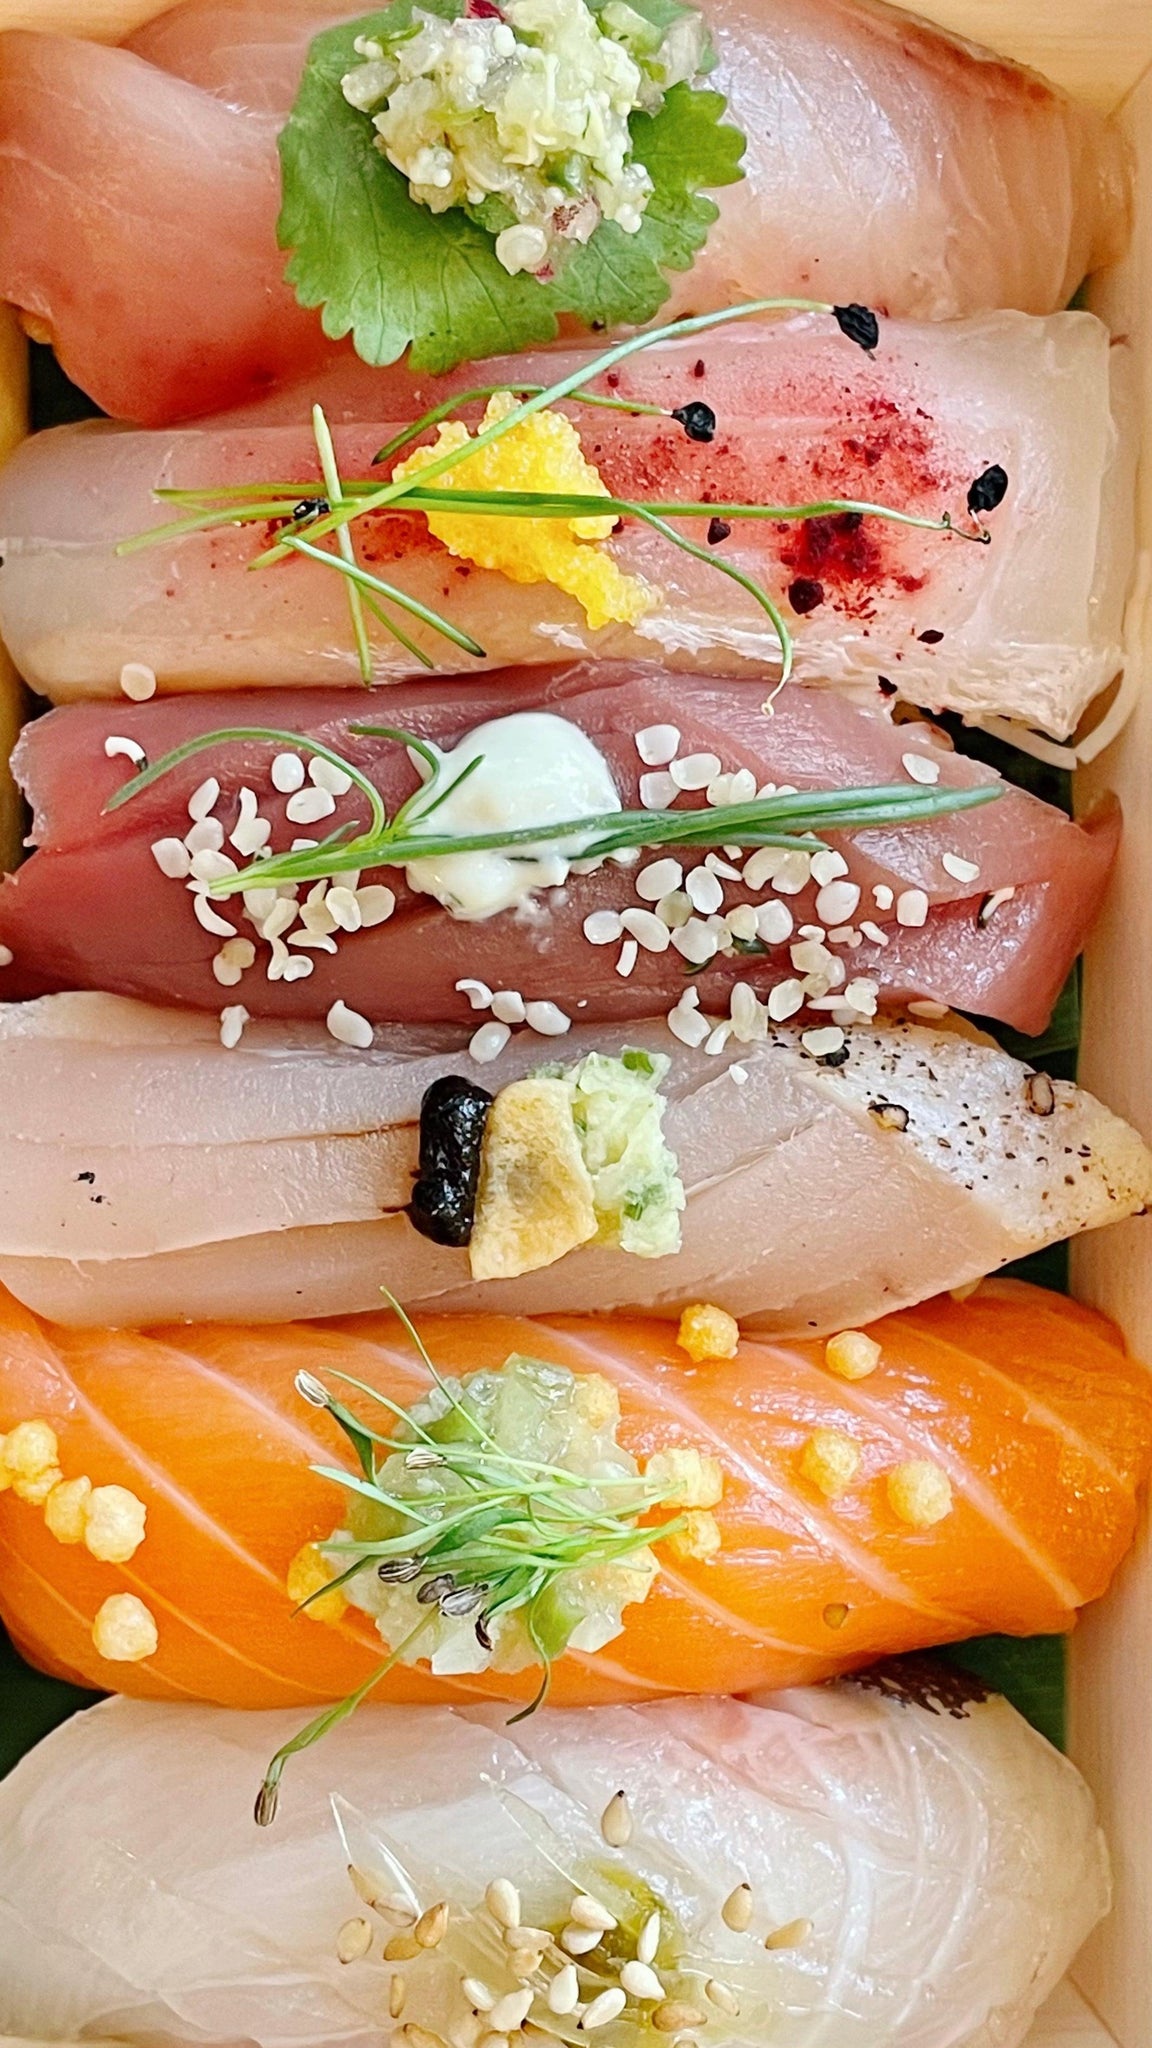 Premium Sushi Party by Chef Han ($185 per guest) - Cheferbly